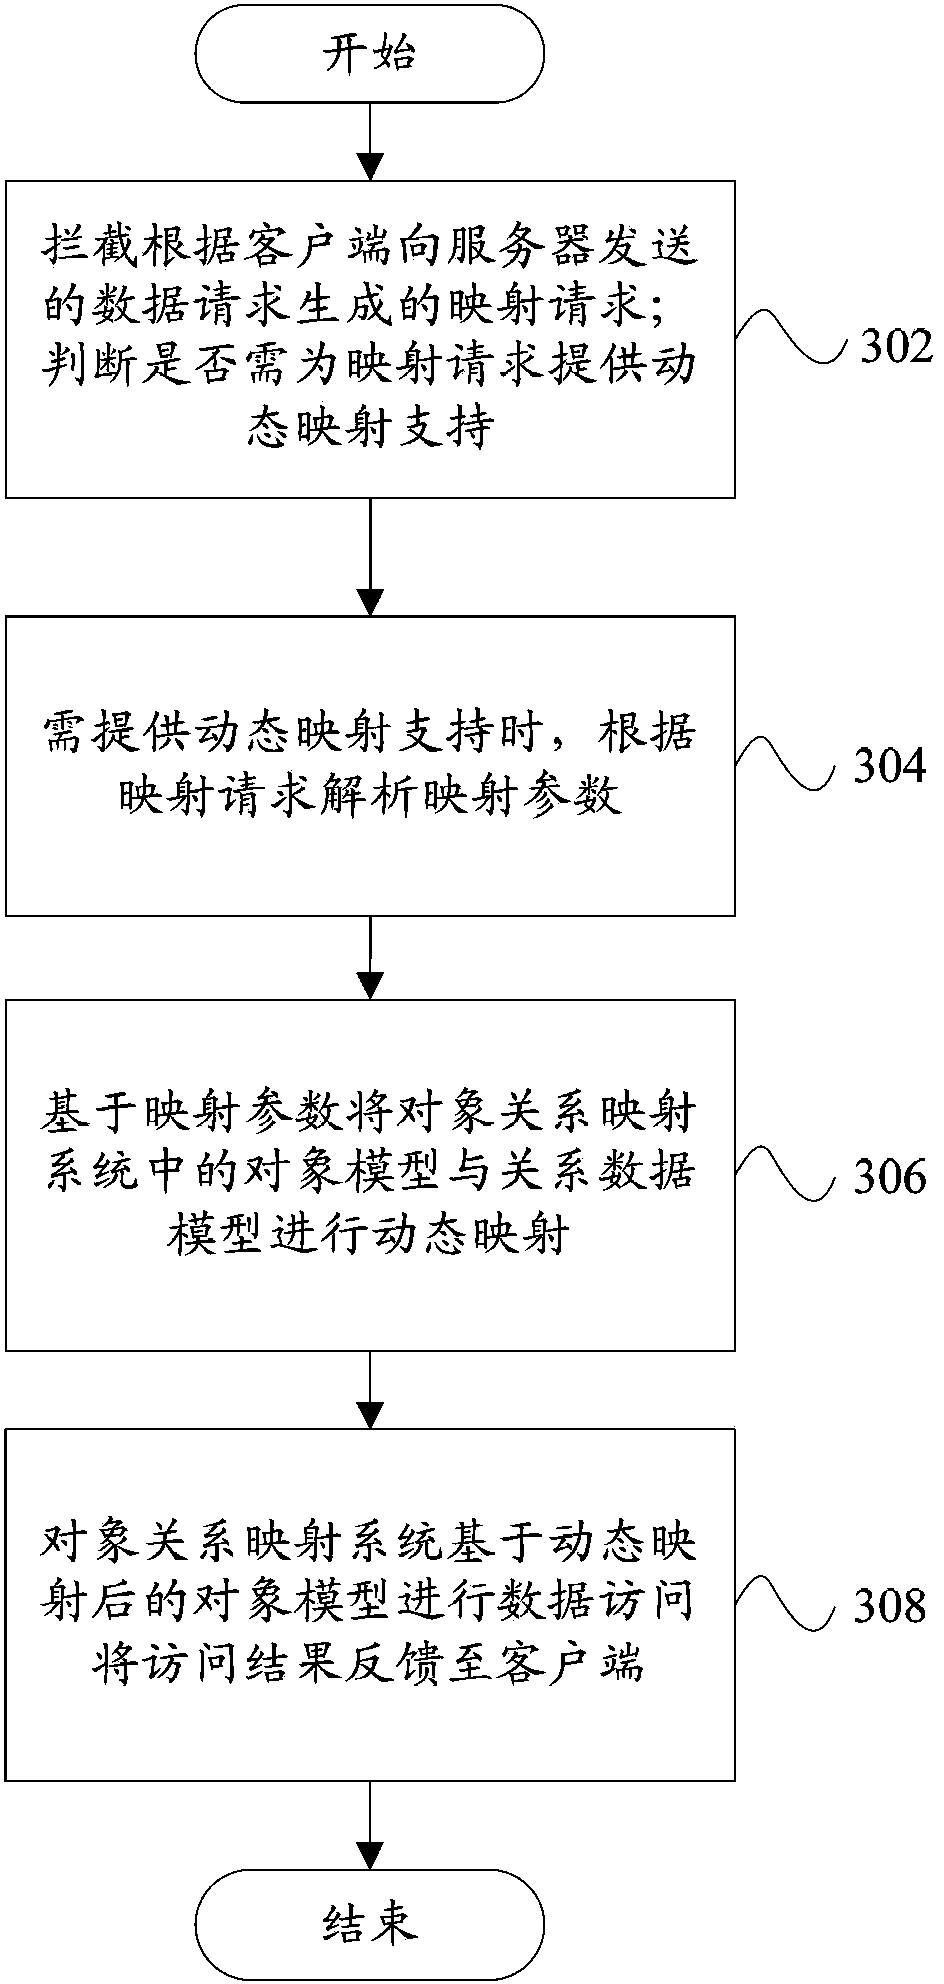 Dynamic proxy system and method of target relation mapping system